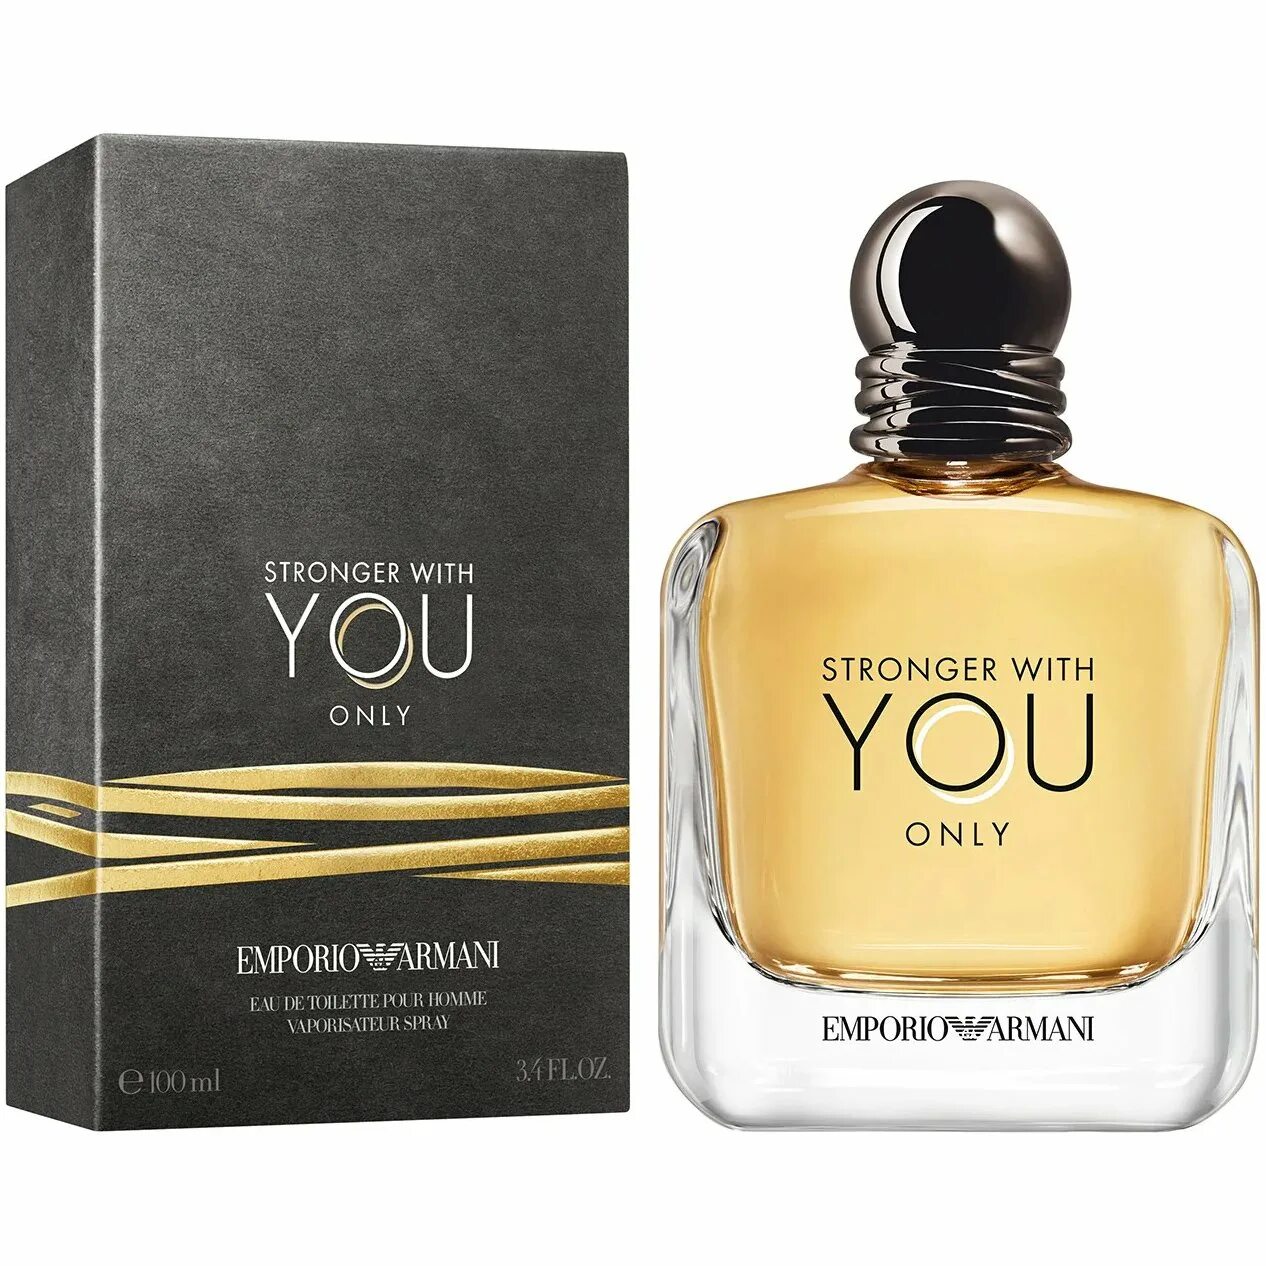 Stronger with you only. Emporio Armani stronger with you 100ml. Туалетная вода Emporio Armani stronger with you. Духи мужские Армани stronger with you. Giorgio Armani Emporio Armani stronger with you, 100 ml.